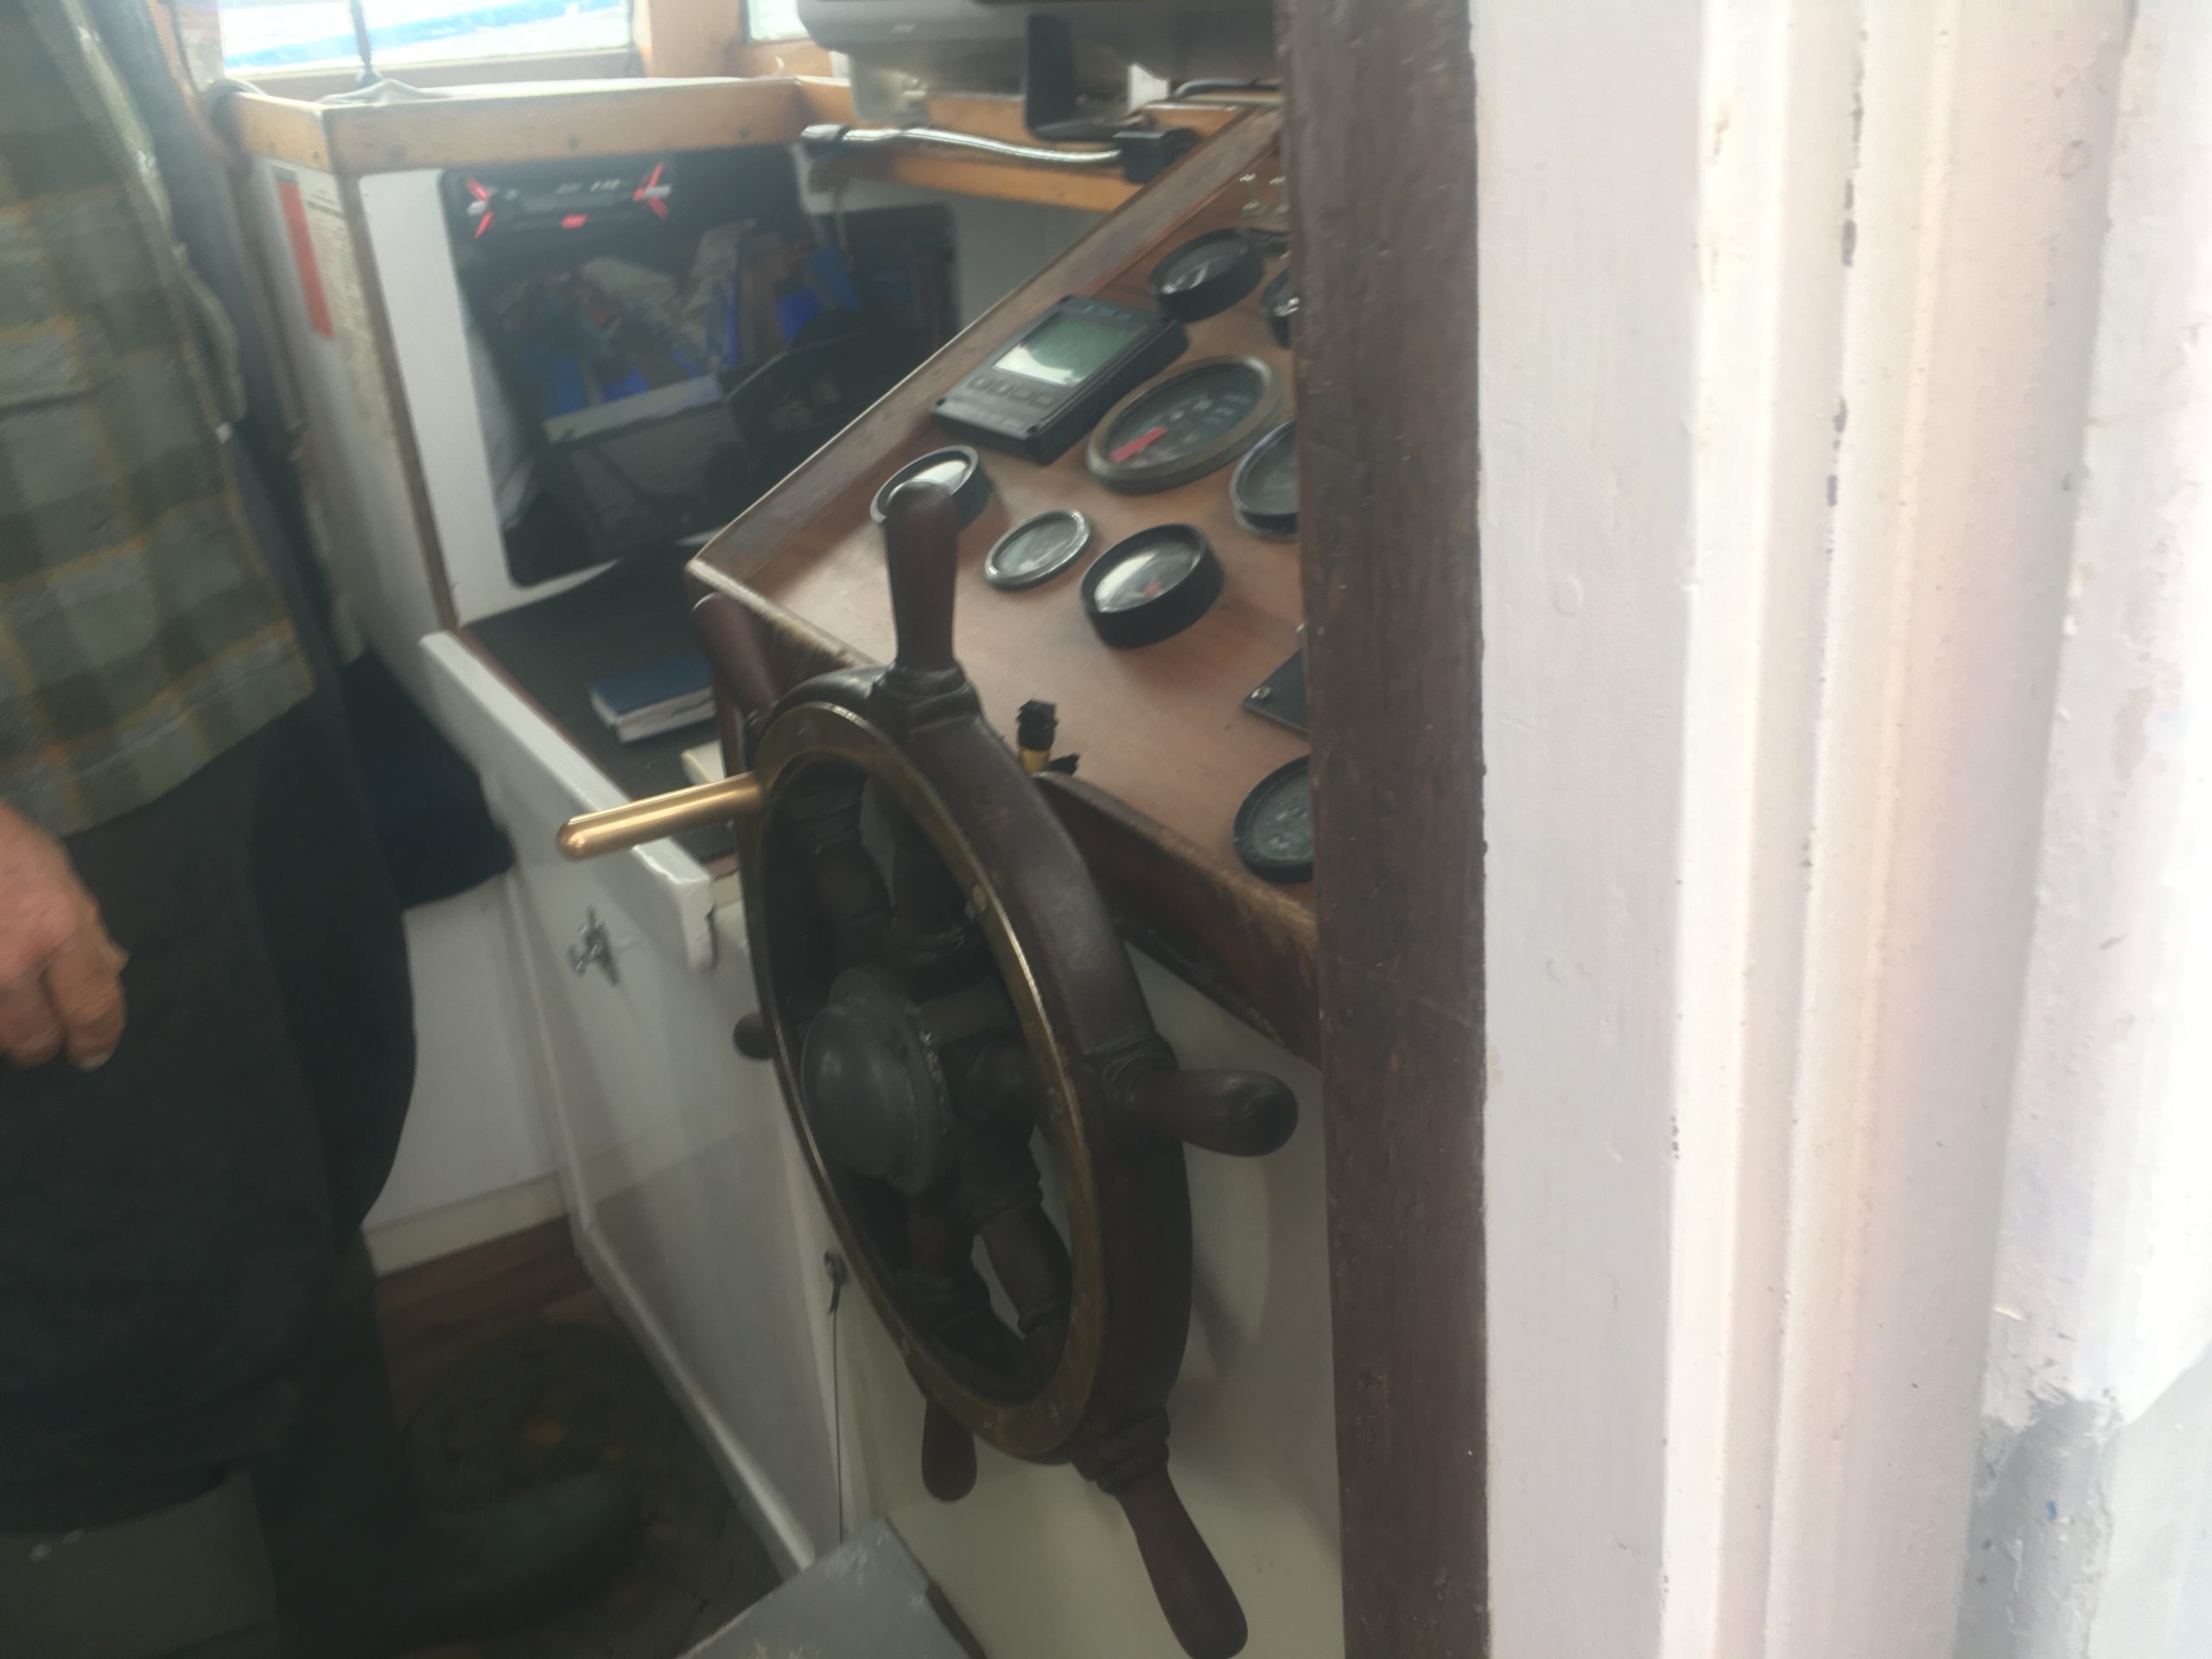 Now, that's a proper ship's wheel on the ferry to Ulva Island, Southland